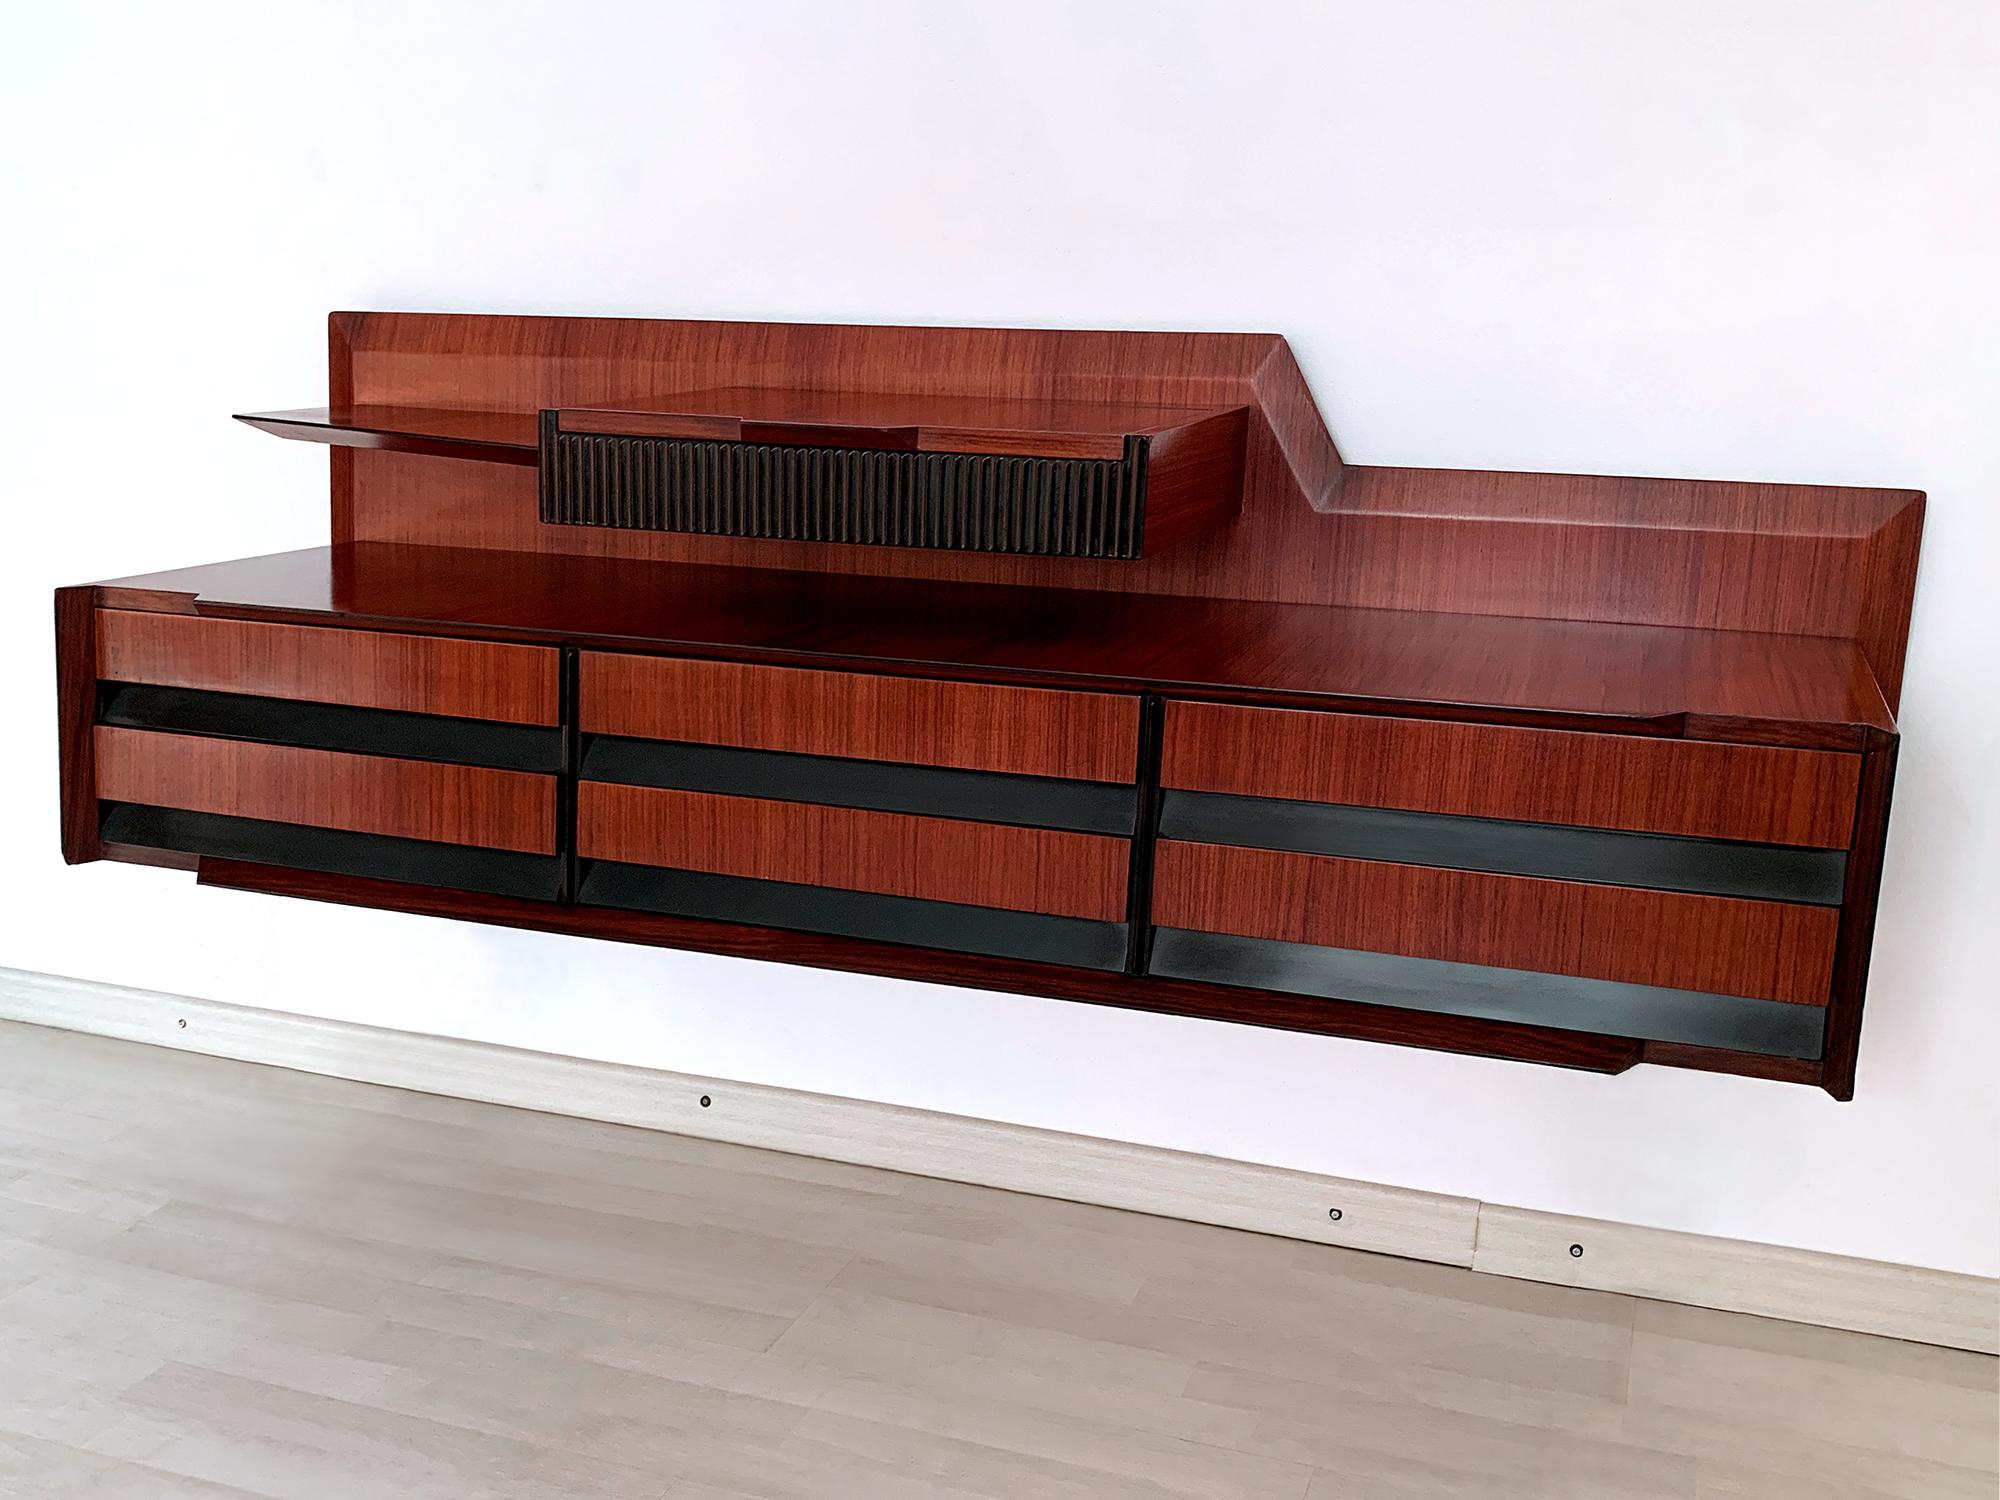 Stunning very rare Italian wall mounted Sideboard and/or Chest of drawers, very well designed by Vittorio Dassi in the 1950s, crafted with a gorgeous material like as warm teak wood.

All items designed and manufactured by Vittorio Dassi are always